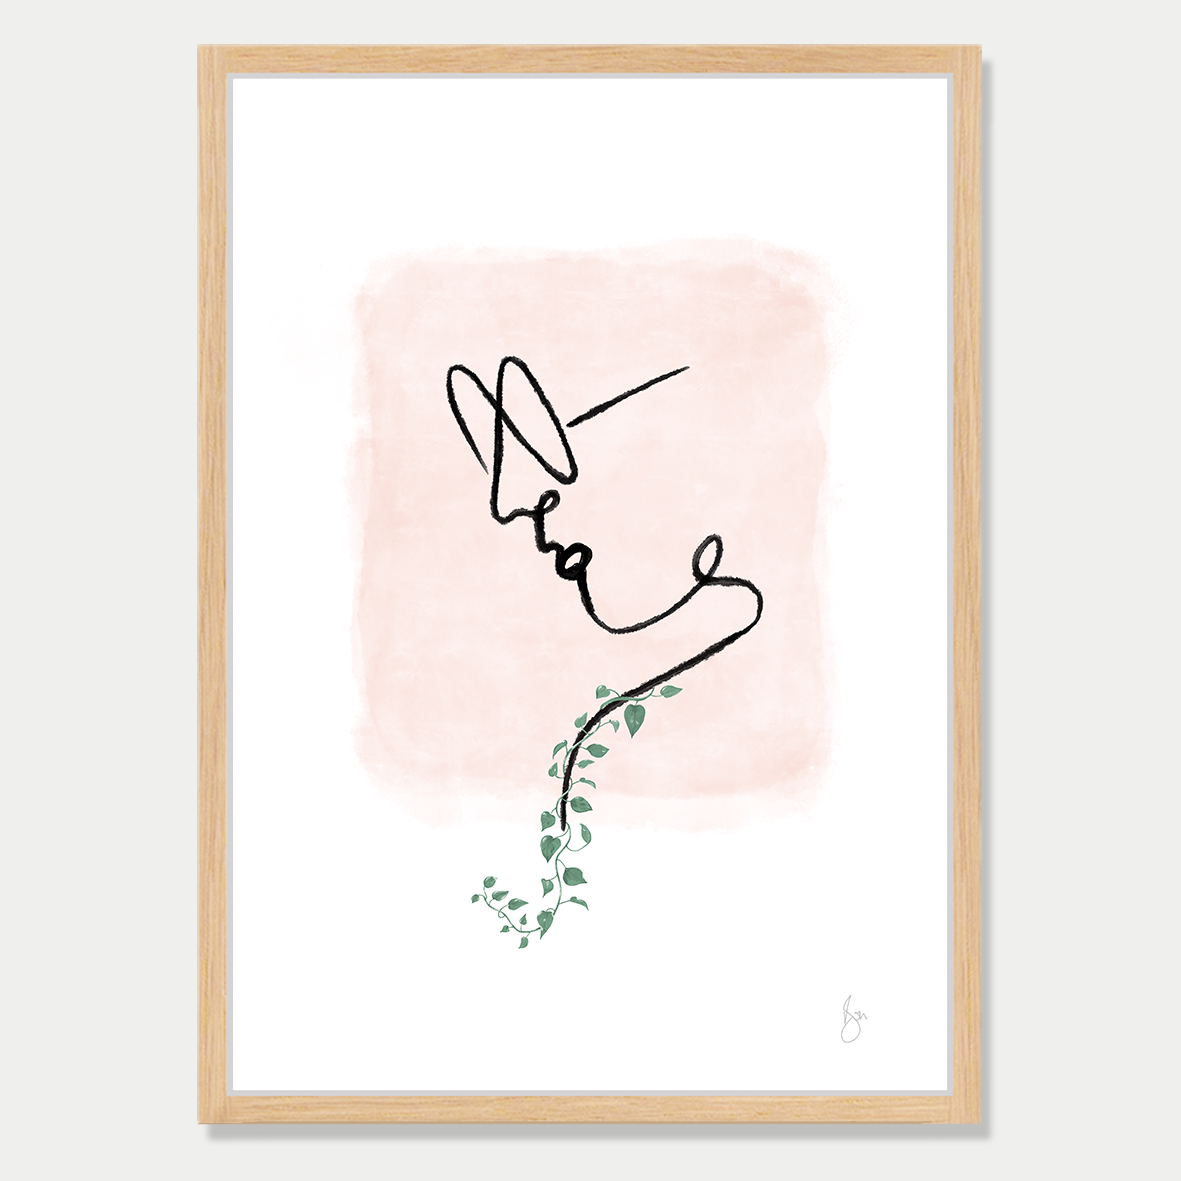 This art print is a line drawing on a woman wearing large glasses and has a single vine growing from her shoulder, by Bon Jung. Printed in New Zealand by endemicworld and framed in raw oak.